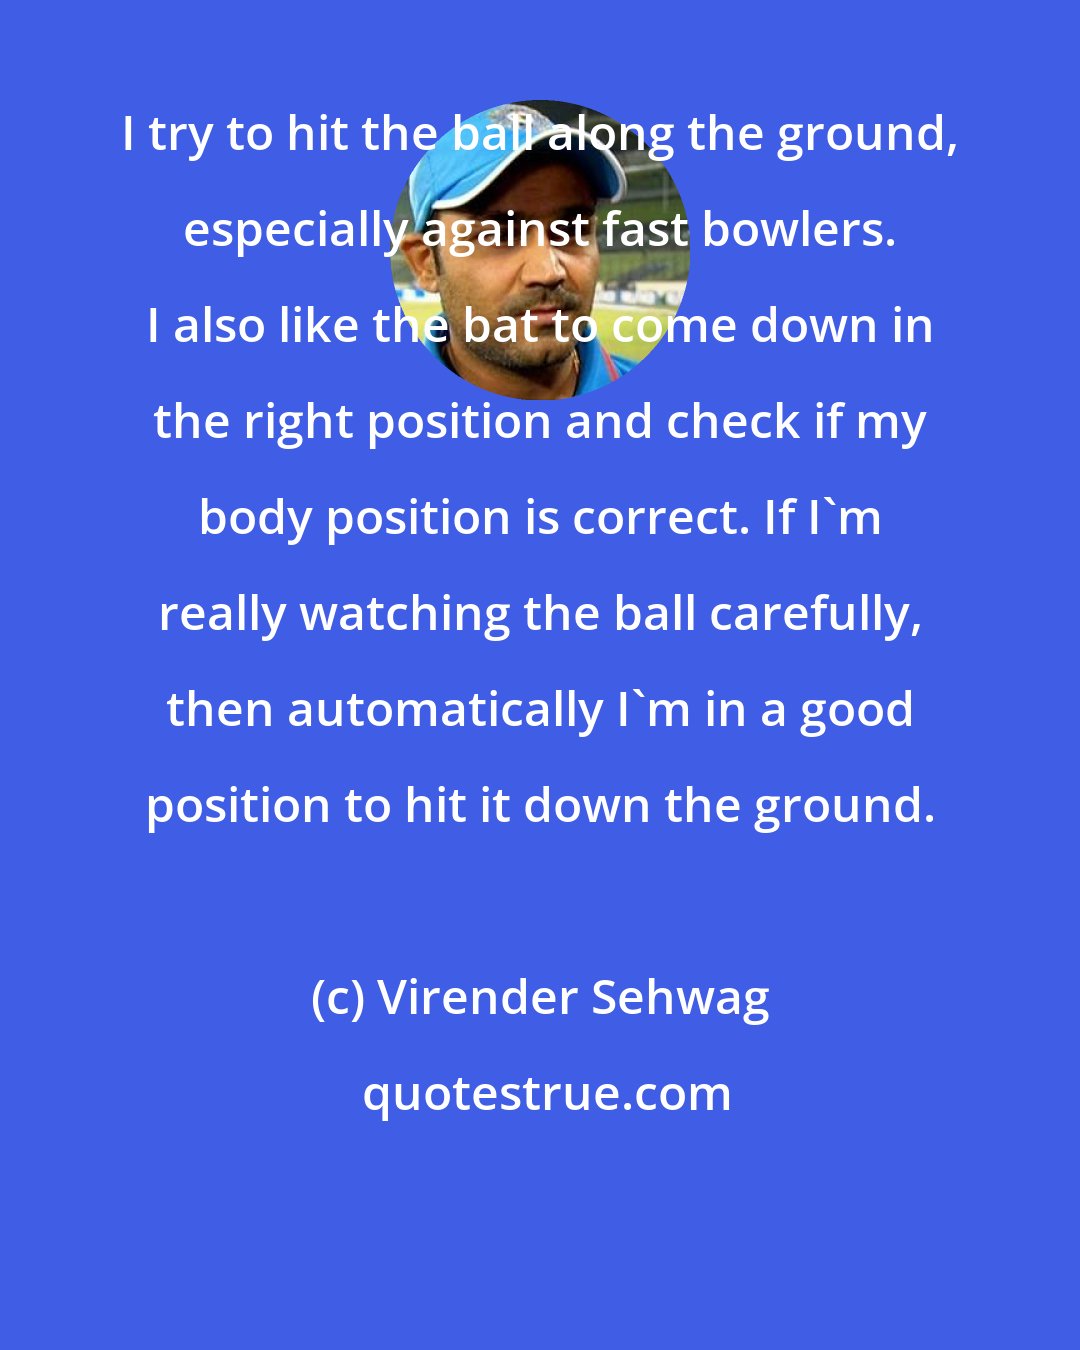 Virender Sehwag: I try to hit the ball along the ground, especially against fast bowlers. I also like the bat to come down in the right position and check if my body position is correct. If I'm really watching the ball carefully, then automatically I'm in a good position to hit it down the ground.